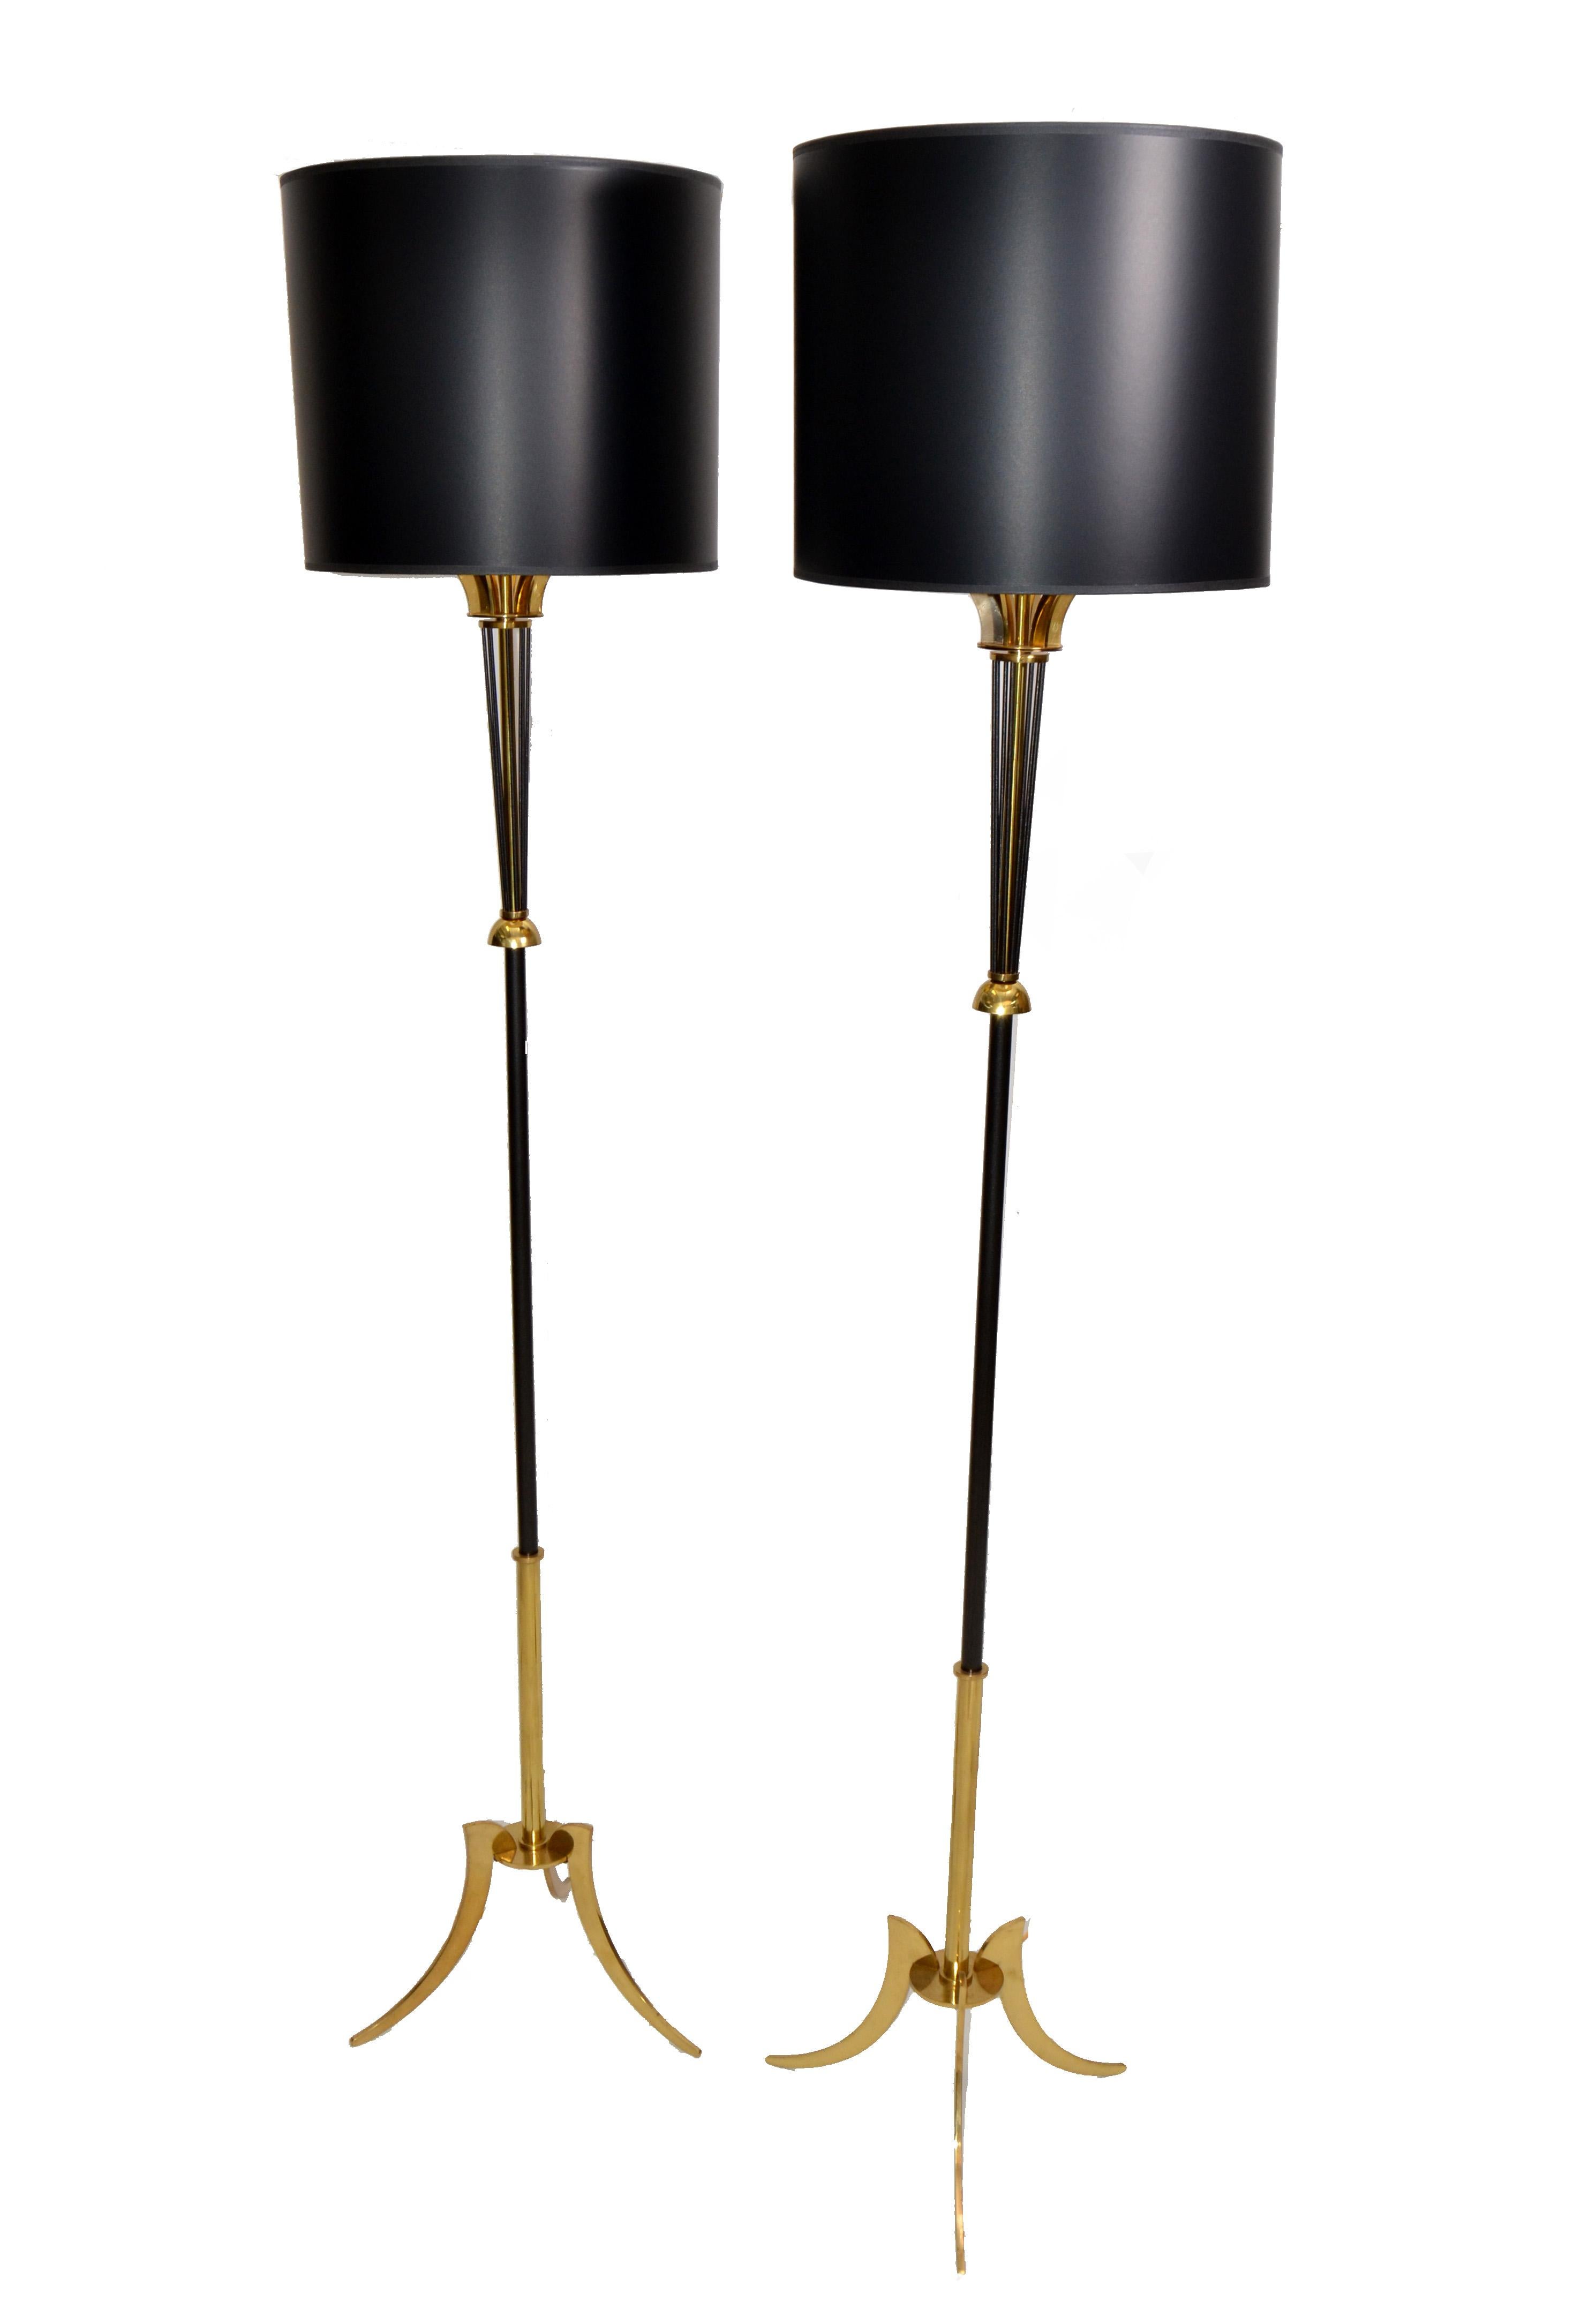 Pair of two patinas brass & gun metal French floor lamp by Maison Lunel, circa 1955 come with black & gold paper shades.
In restored and US Rewired condition and each takes one regular or LED light bulb.
The pair is ready for a new home.